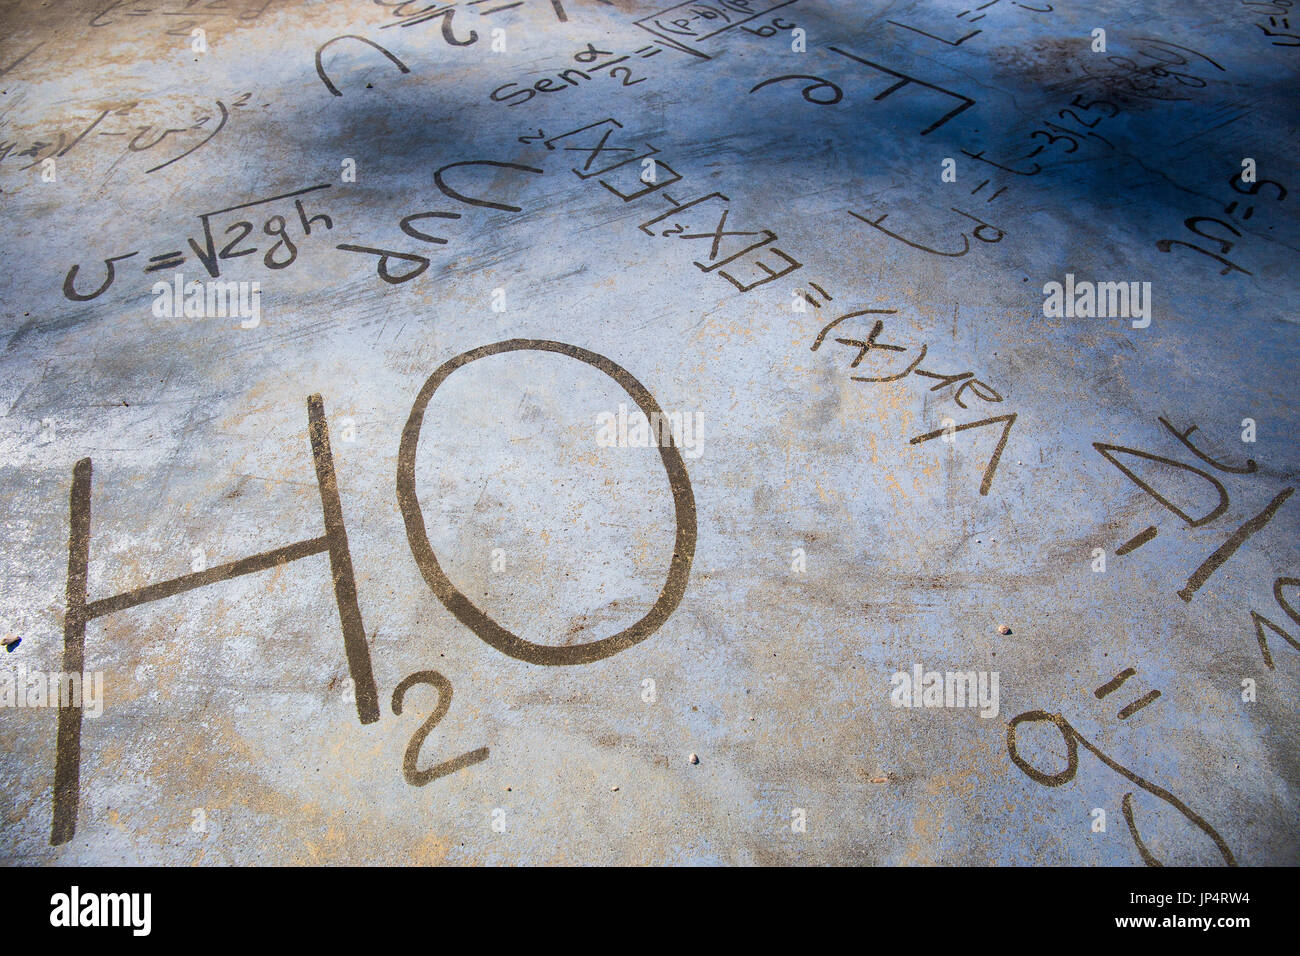 Chemical equations on a stone pavement. H2O. Stock Photo